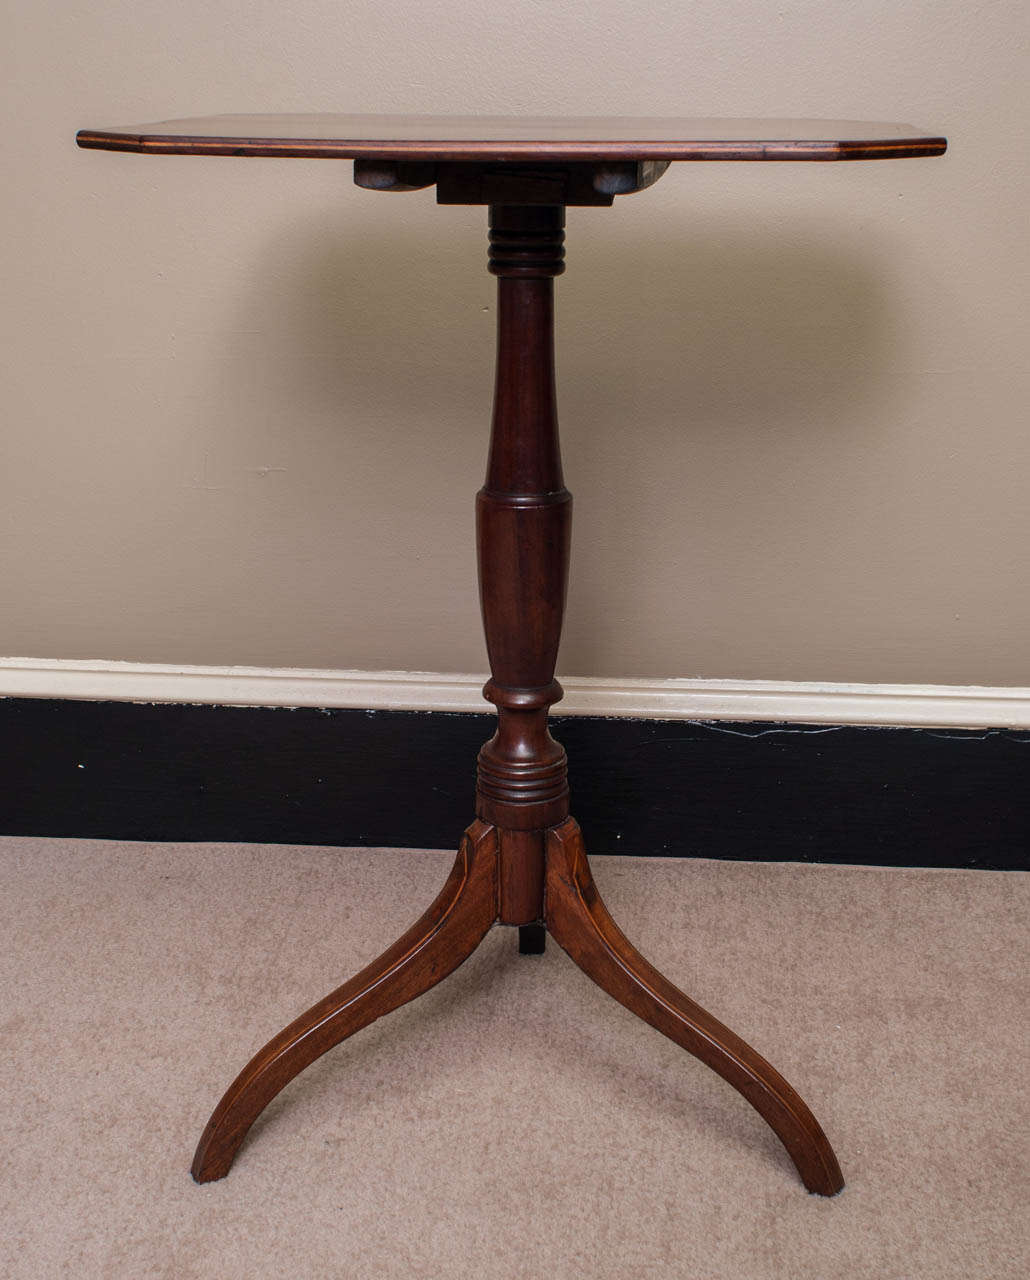 A charming table with an excellent patina - canted corners - inlay on top and feet - good turning on the pedestal.